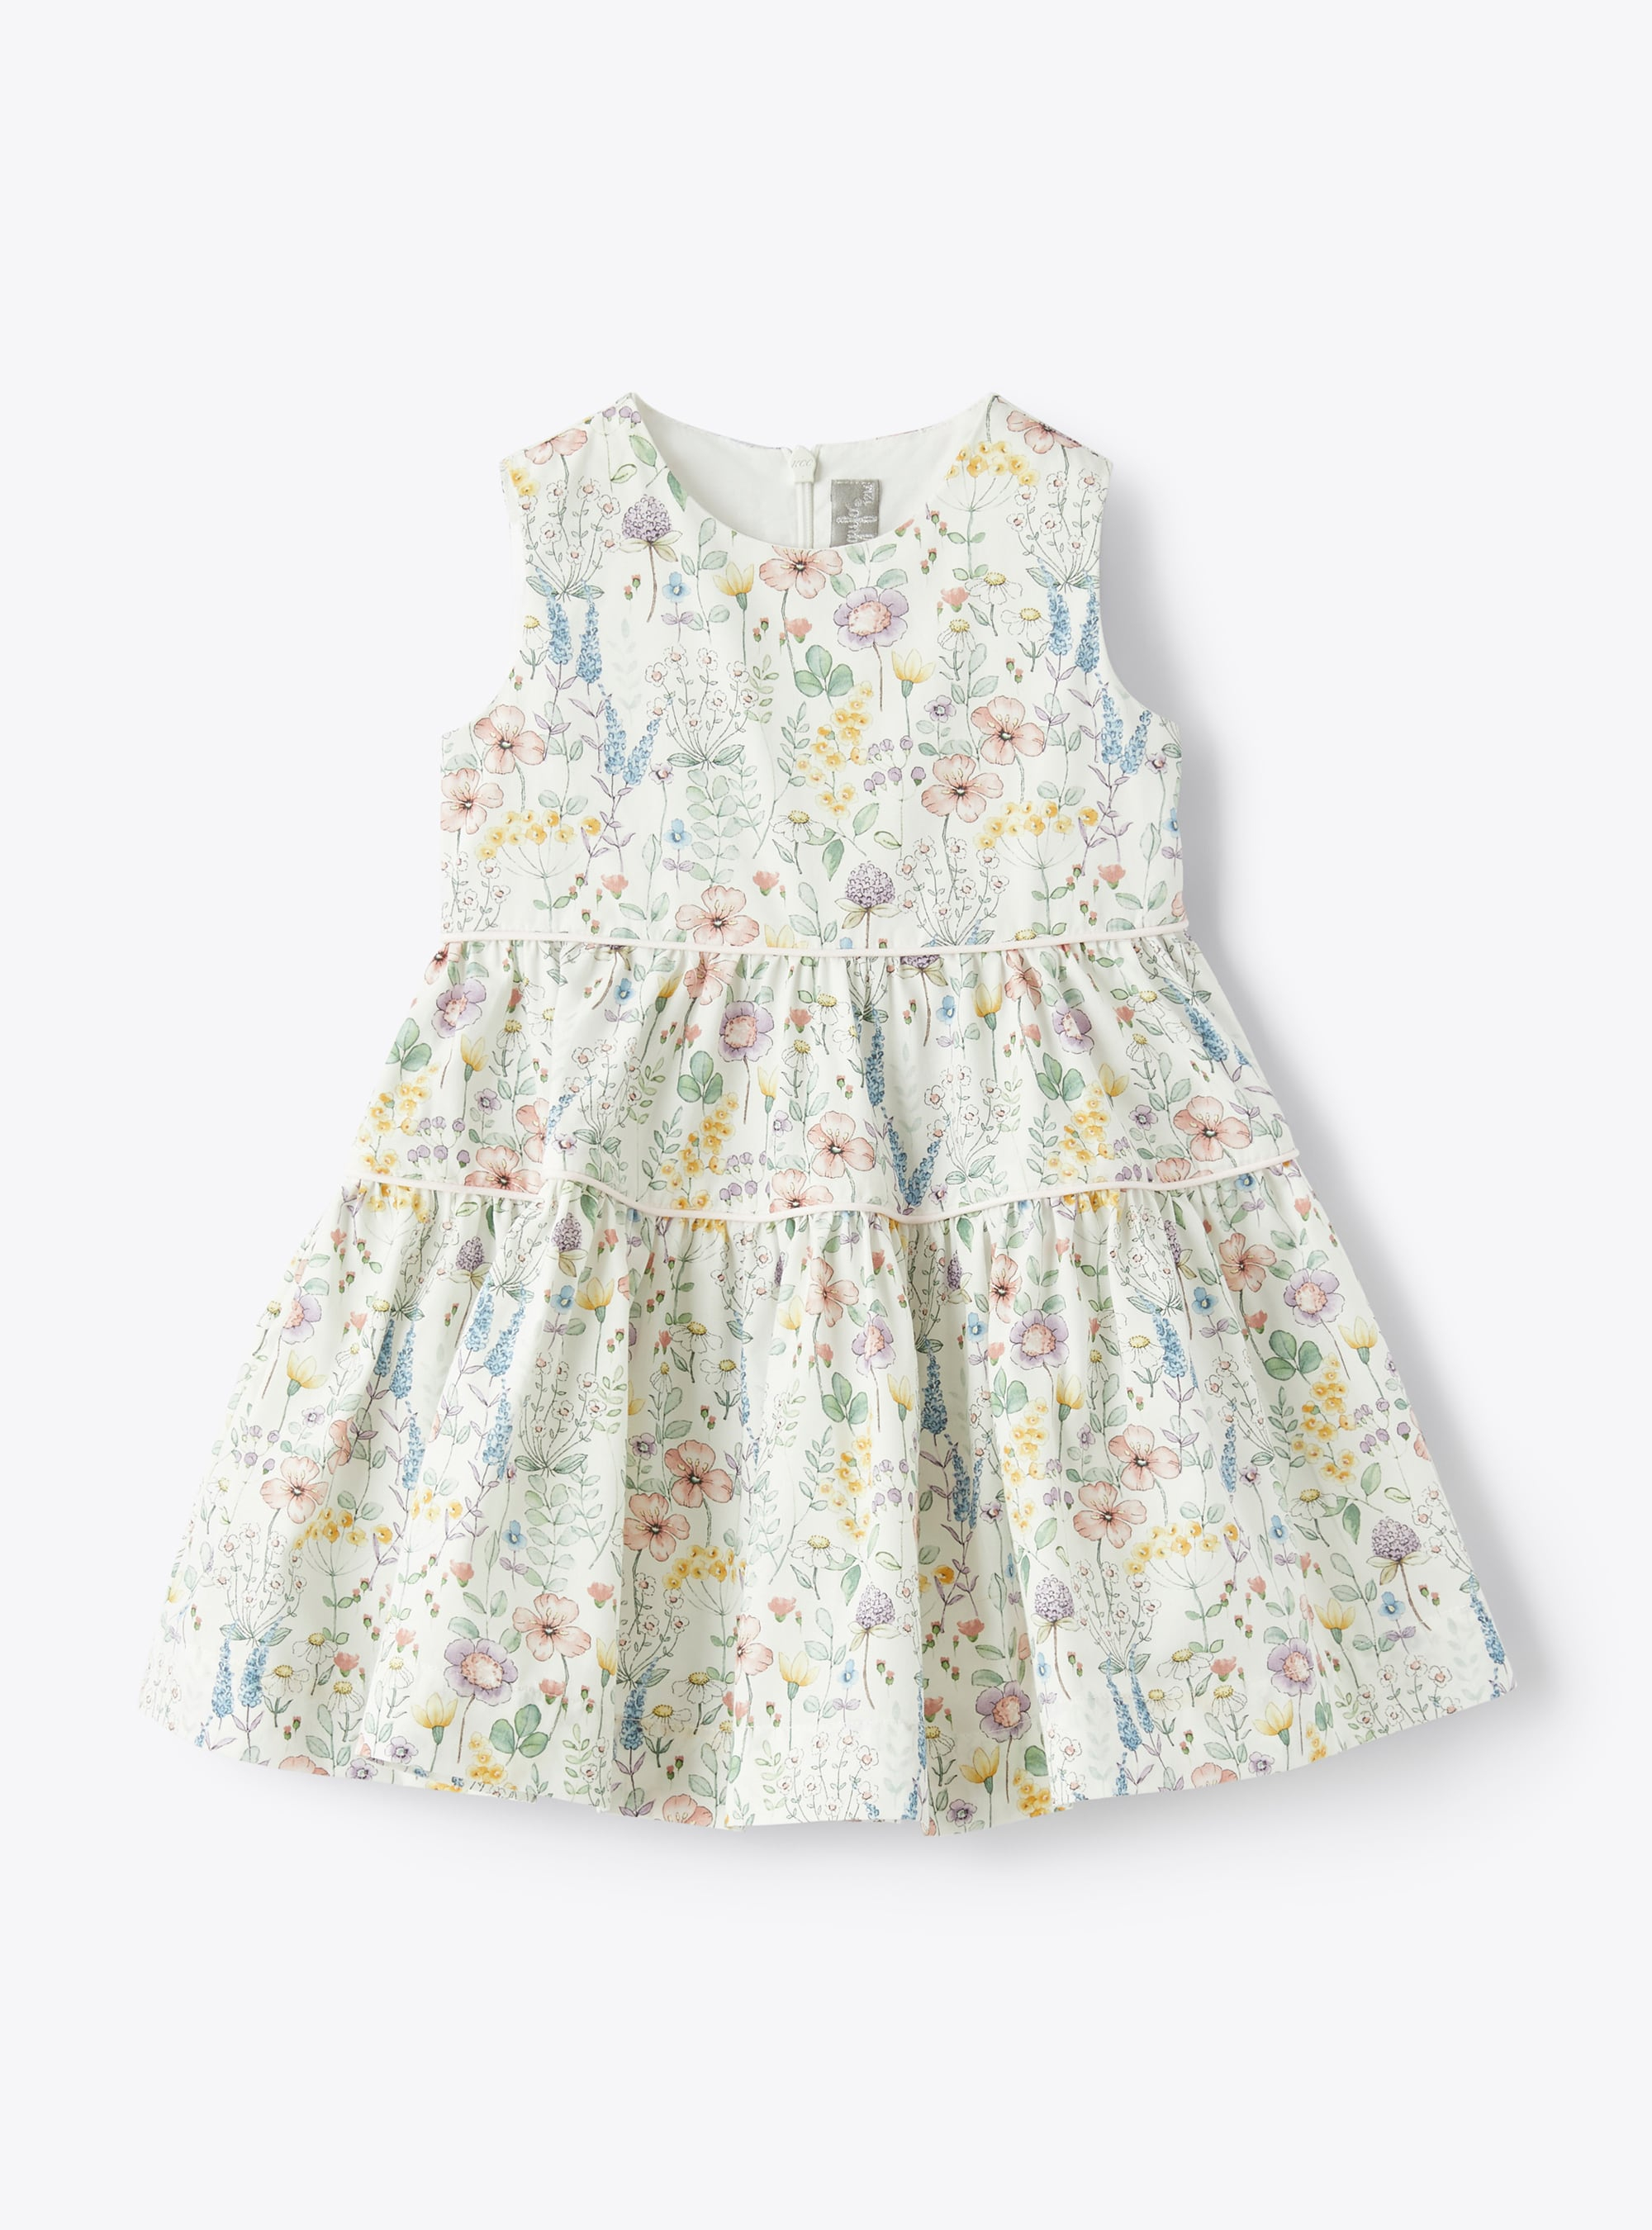 Dress in floral-patterned organic cotton - Dresses - Il Gufo